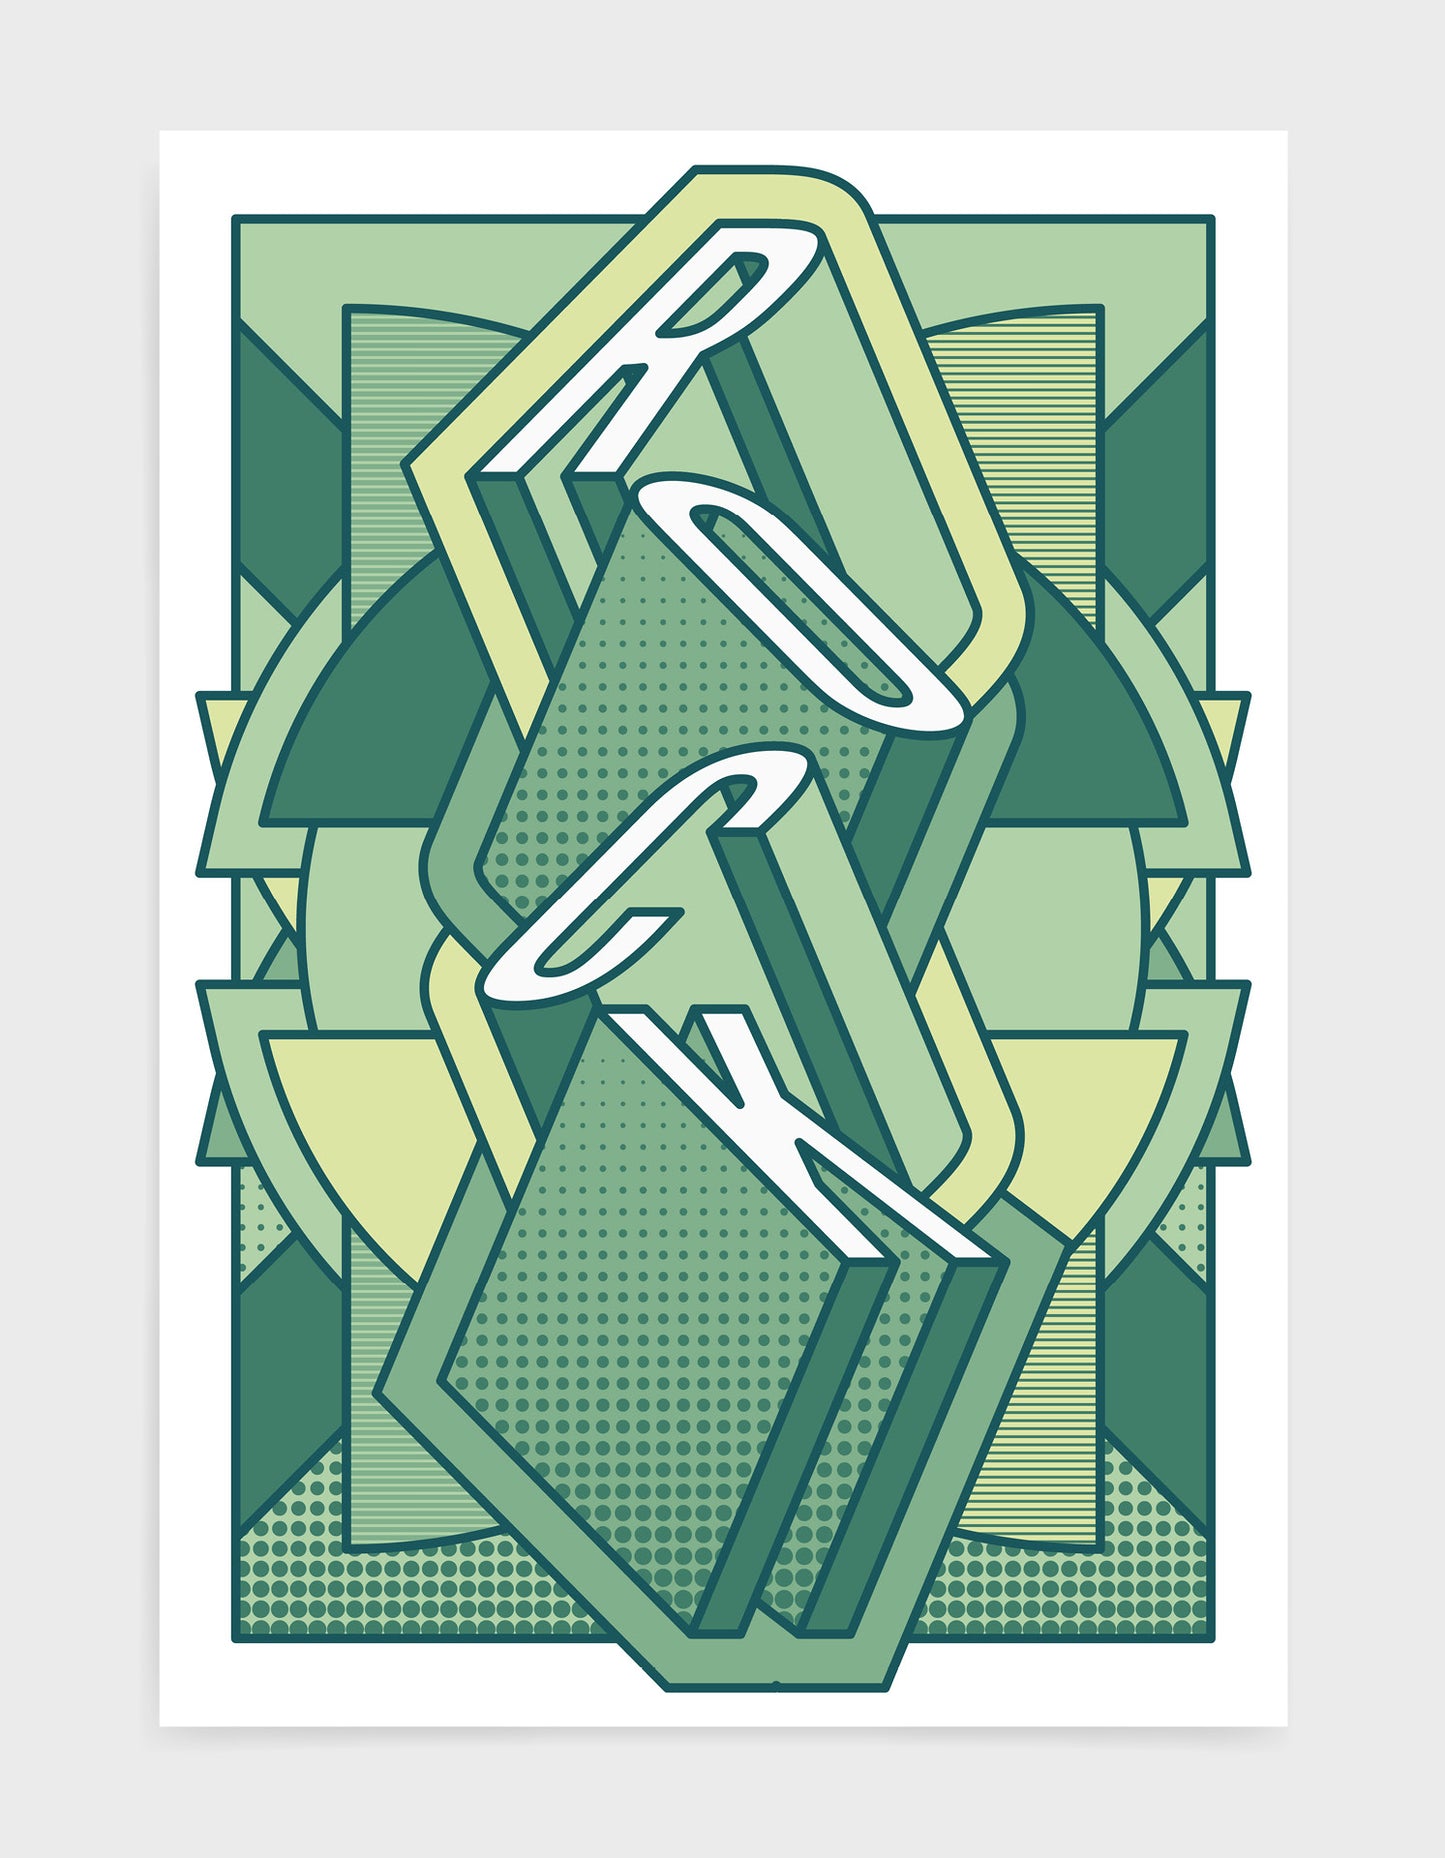 rock music art print featuring a geometric abstract pattern in bold shapes and green tone colours. Block typography depicts the word Rock in tumbling text